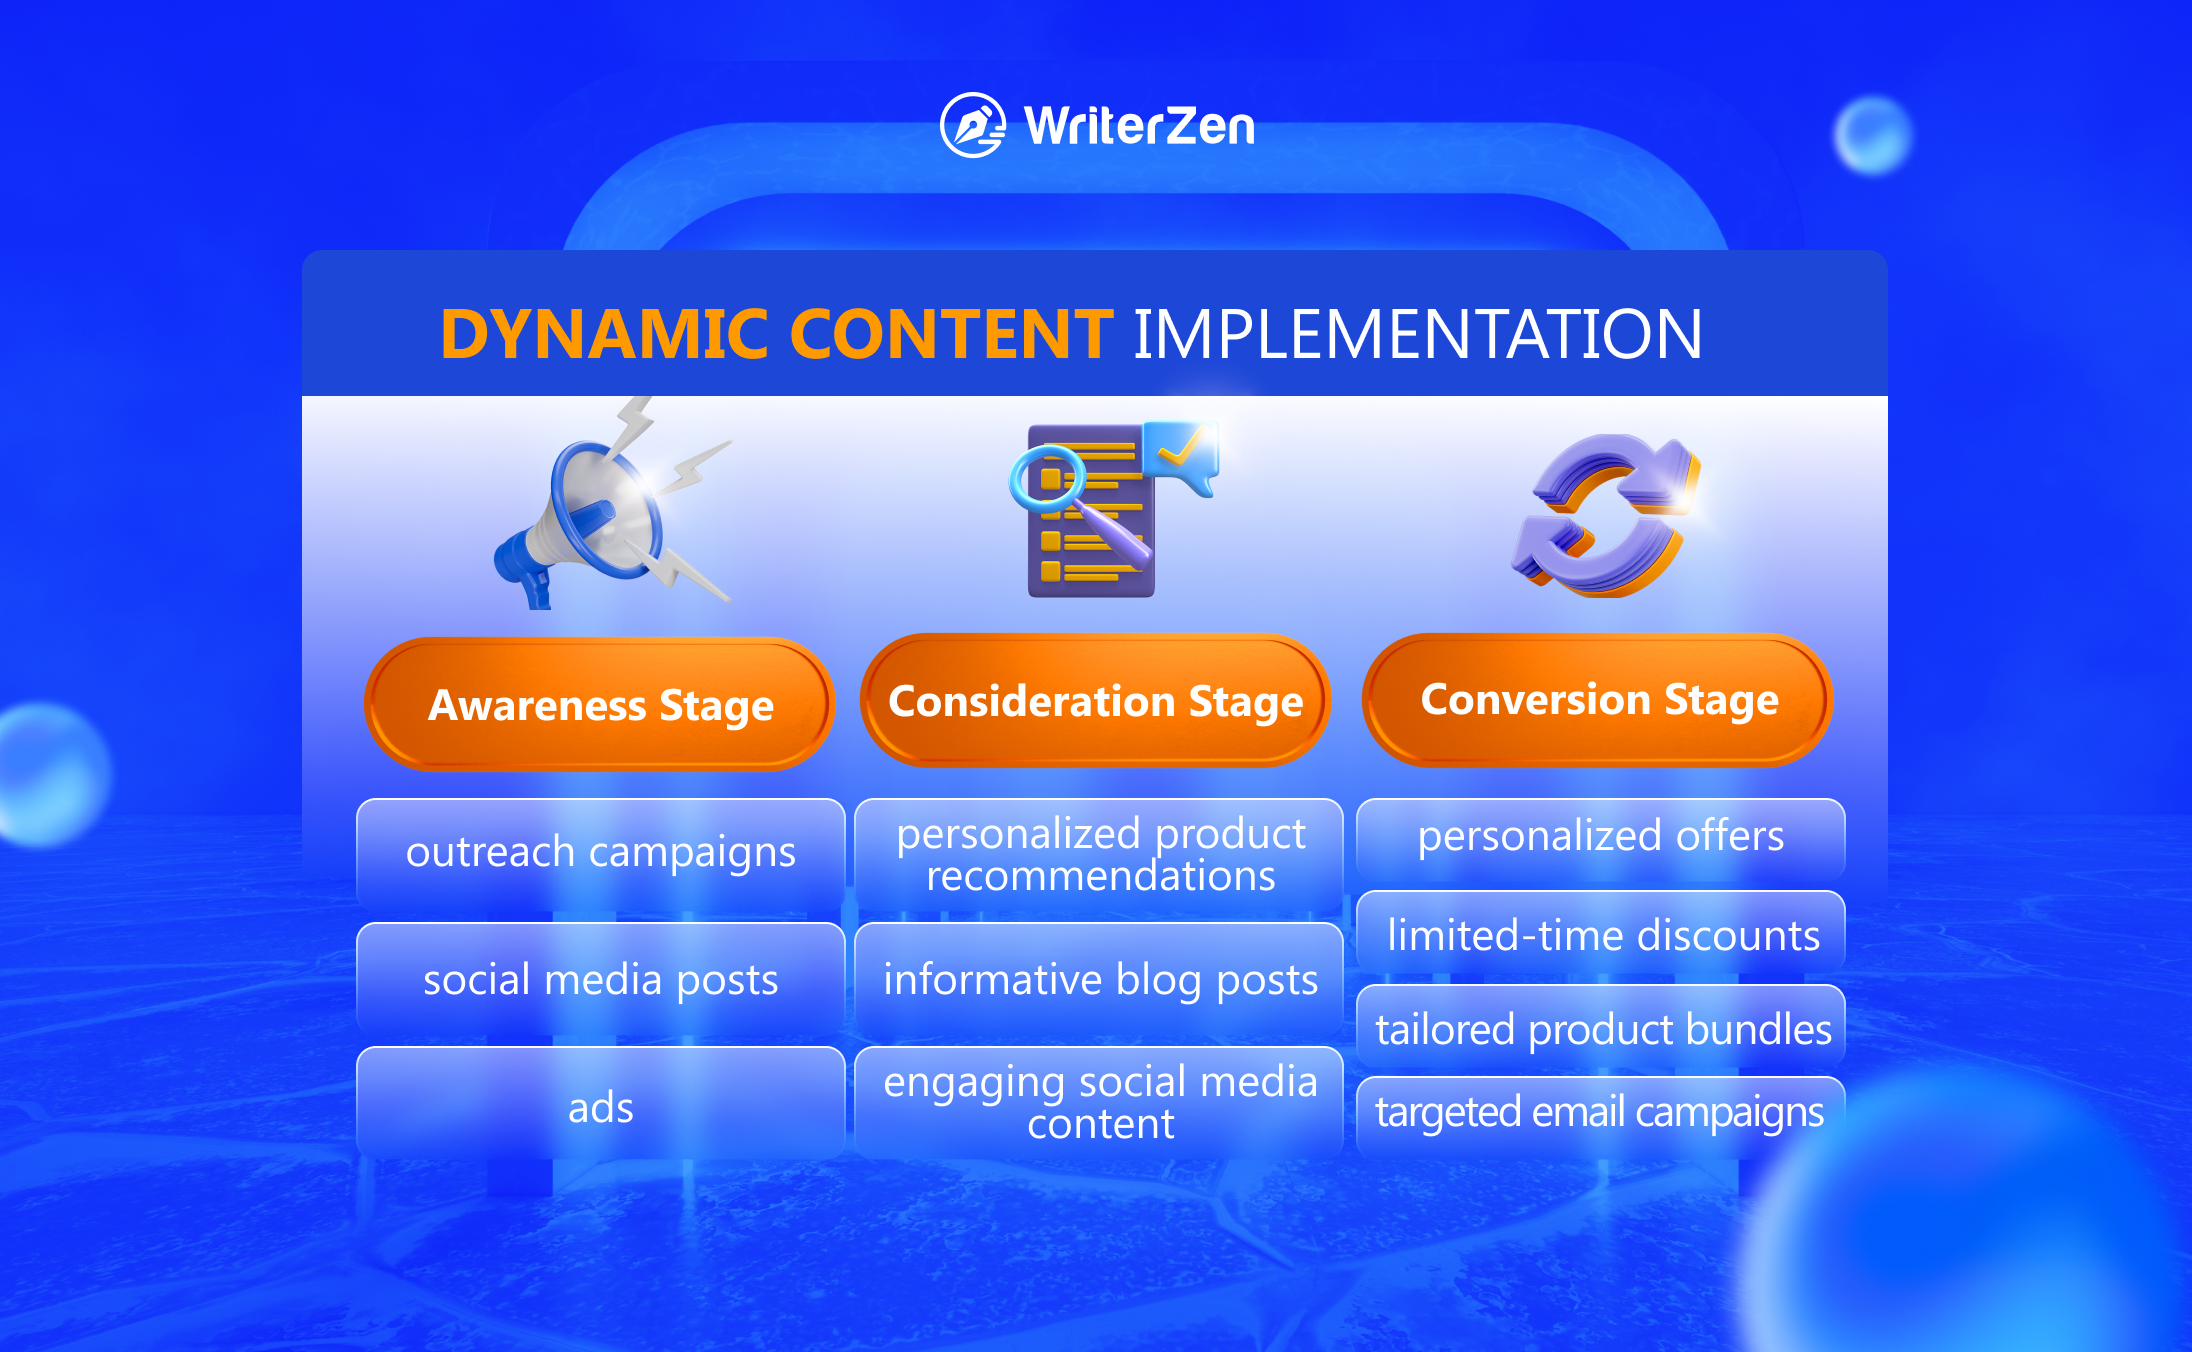 Implement Dynamic Content Based on Buyer Journey